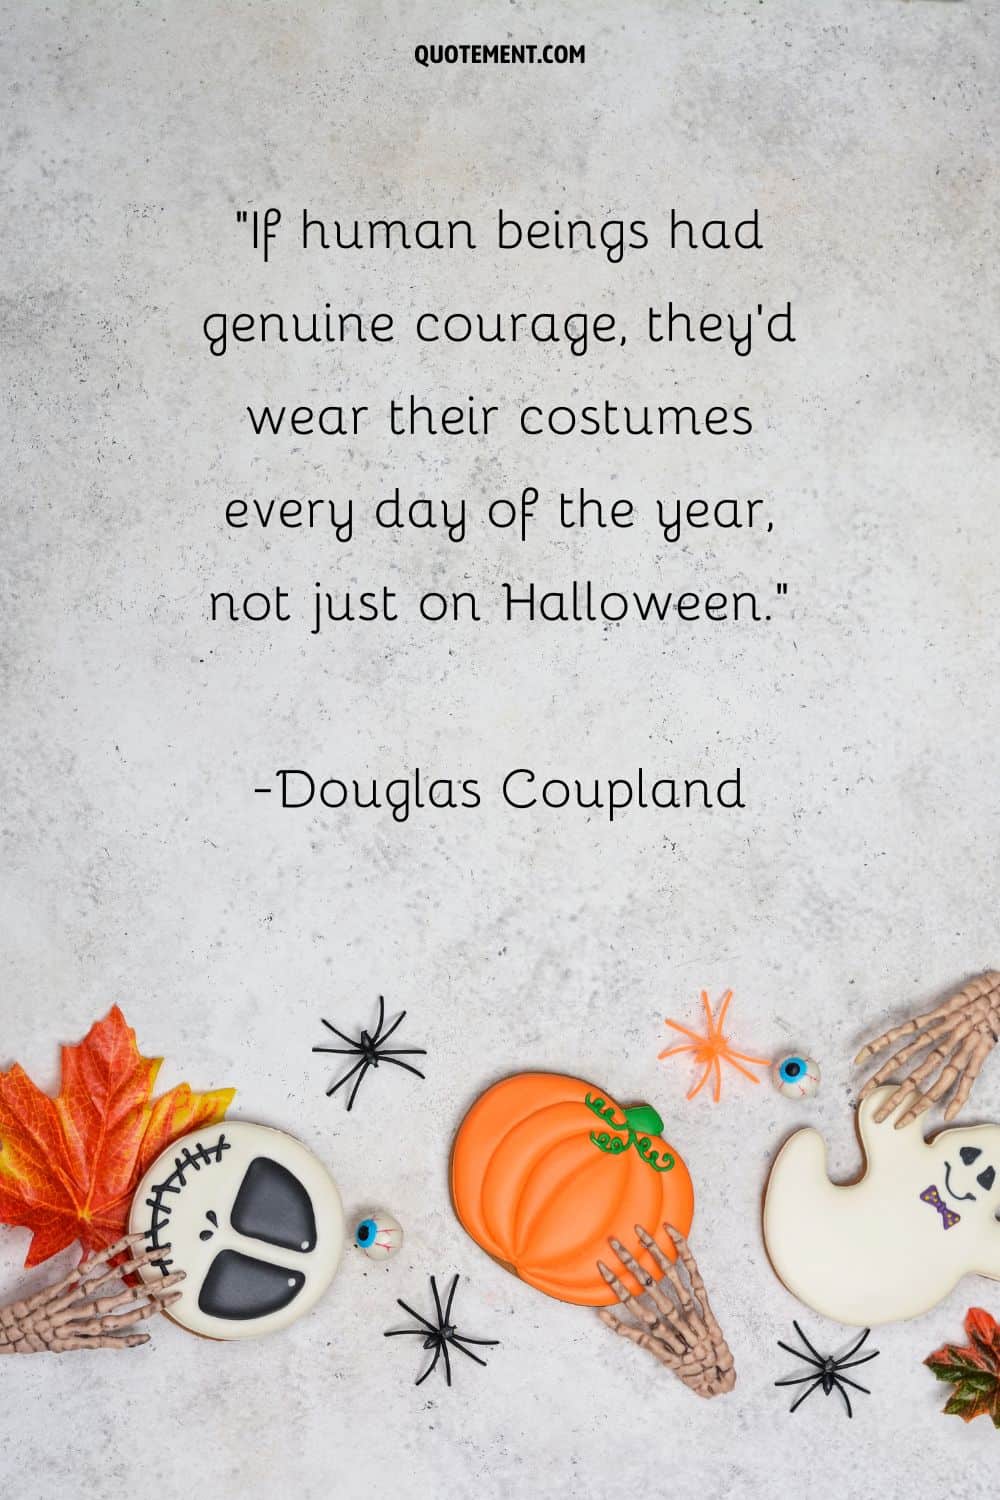 If human beings had genuine courage, they'd wear their costumes every day of the year, not just on Halloween